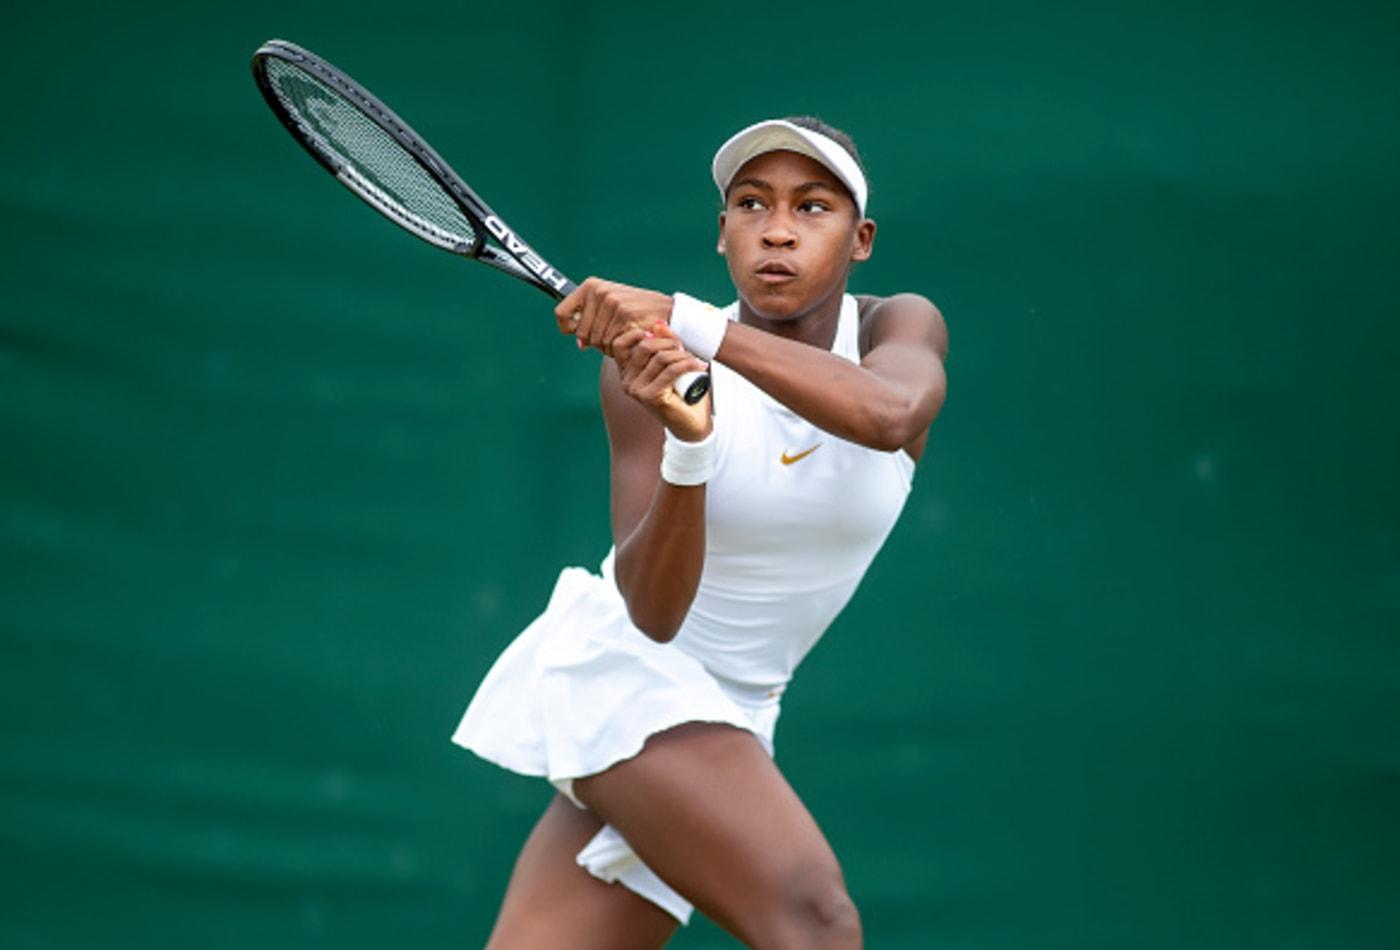 Cori Gauff is the youngest player to qualify for Wimbledon